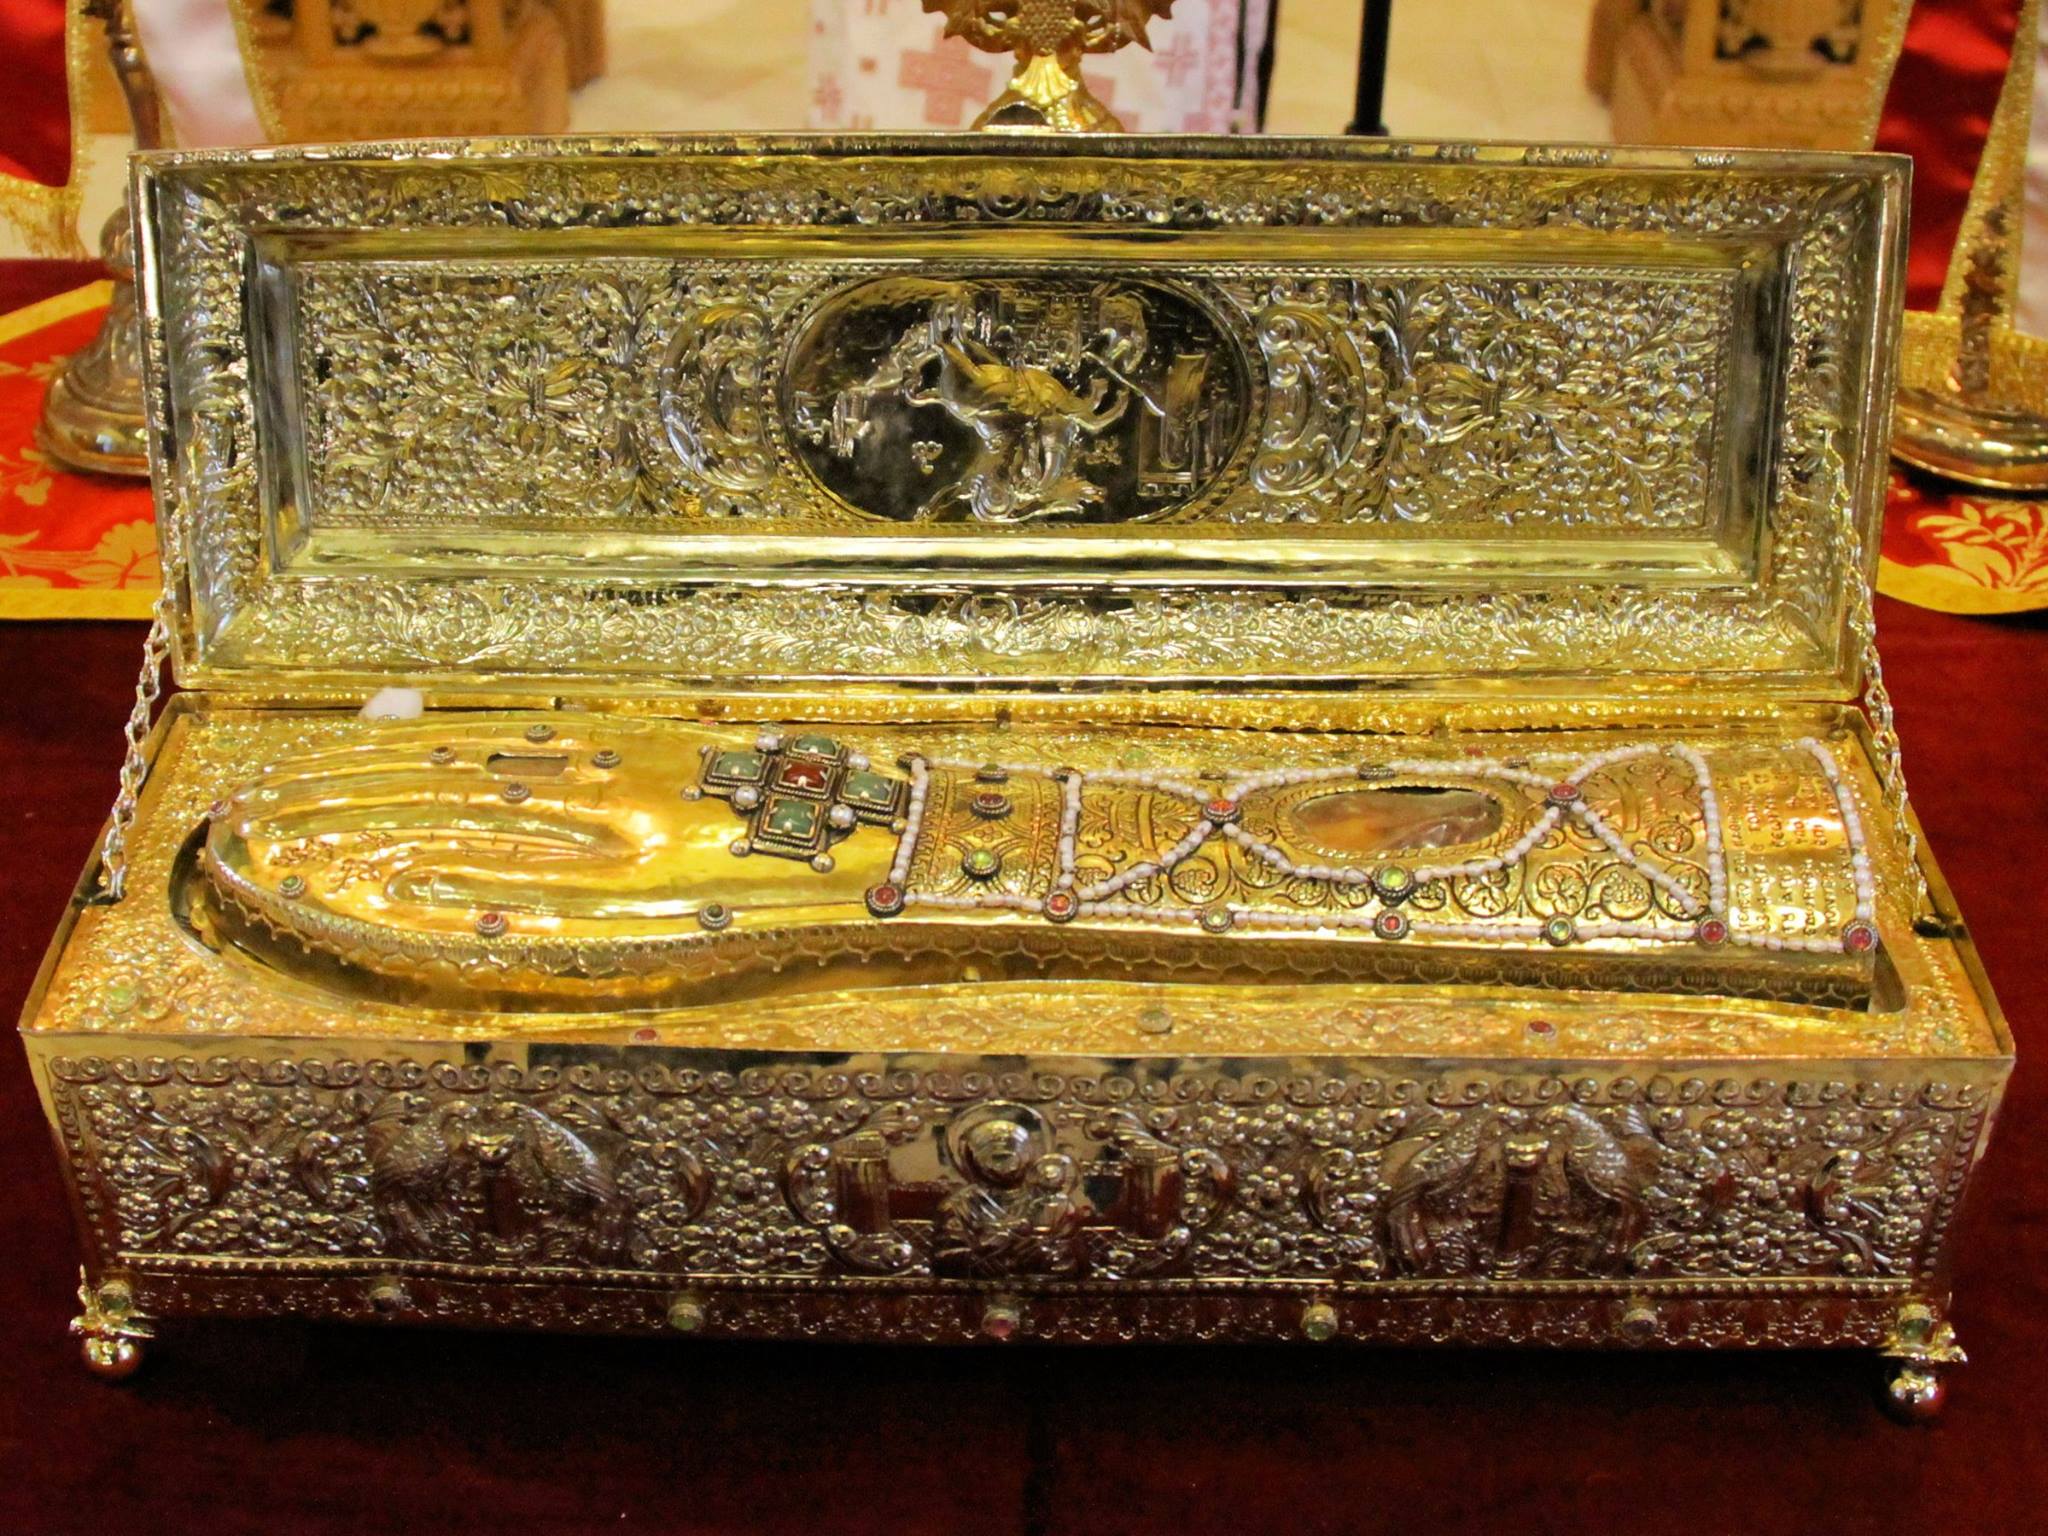 Relic of St. George from the Monastery of Xenophontos (Mount Athos)